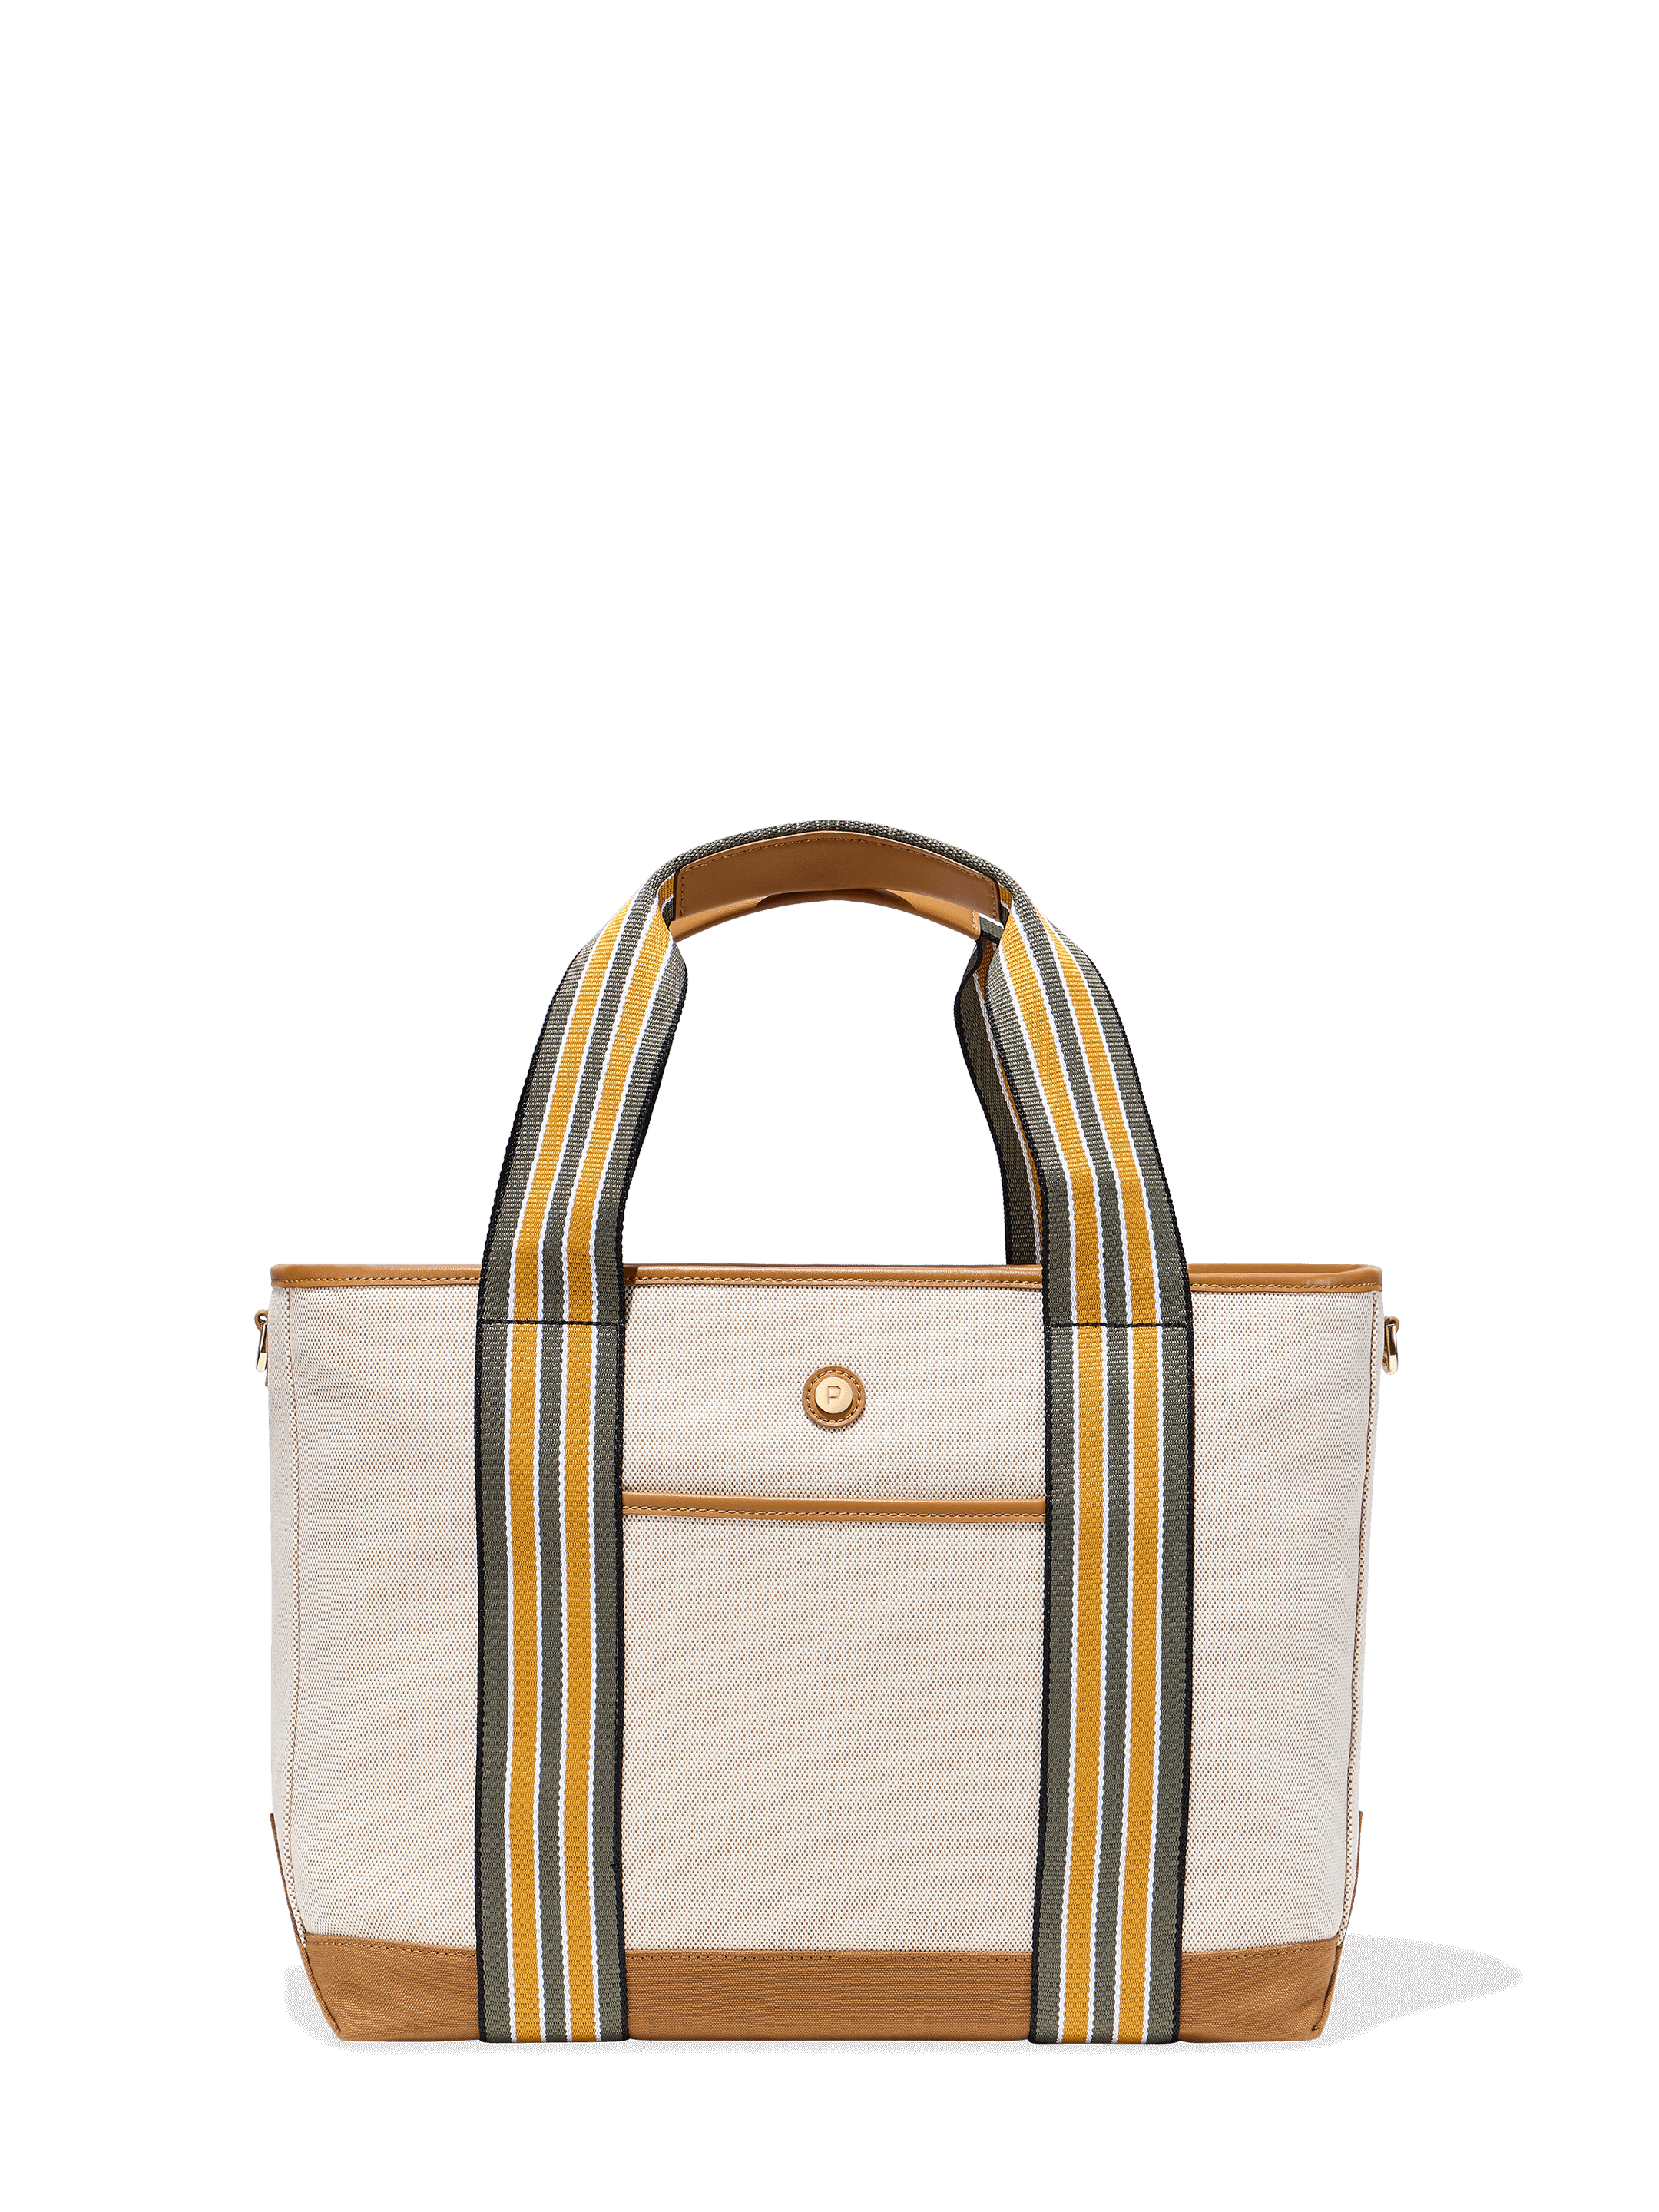 Has anyone been obsessing over the new Ralph Lauren bags? : r/handbags